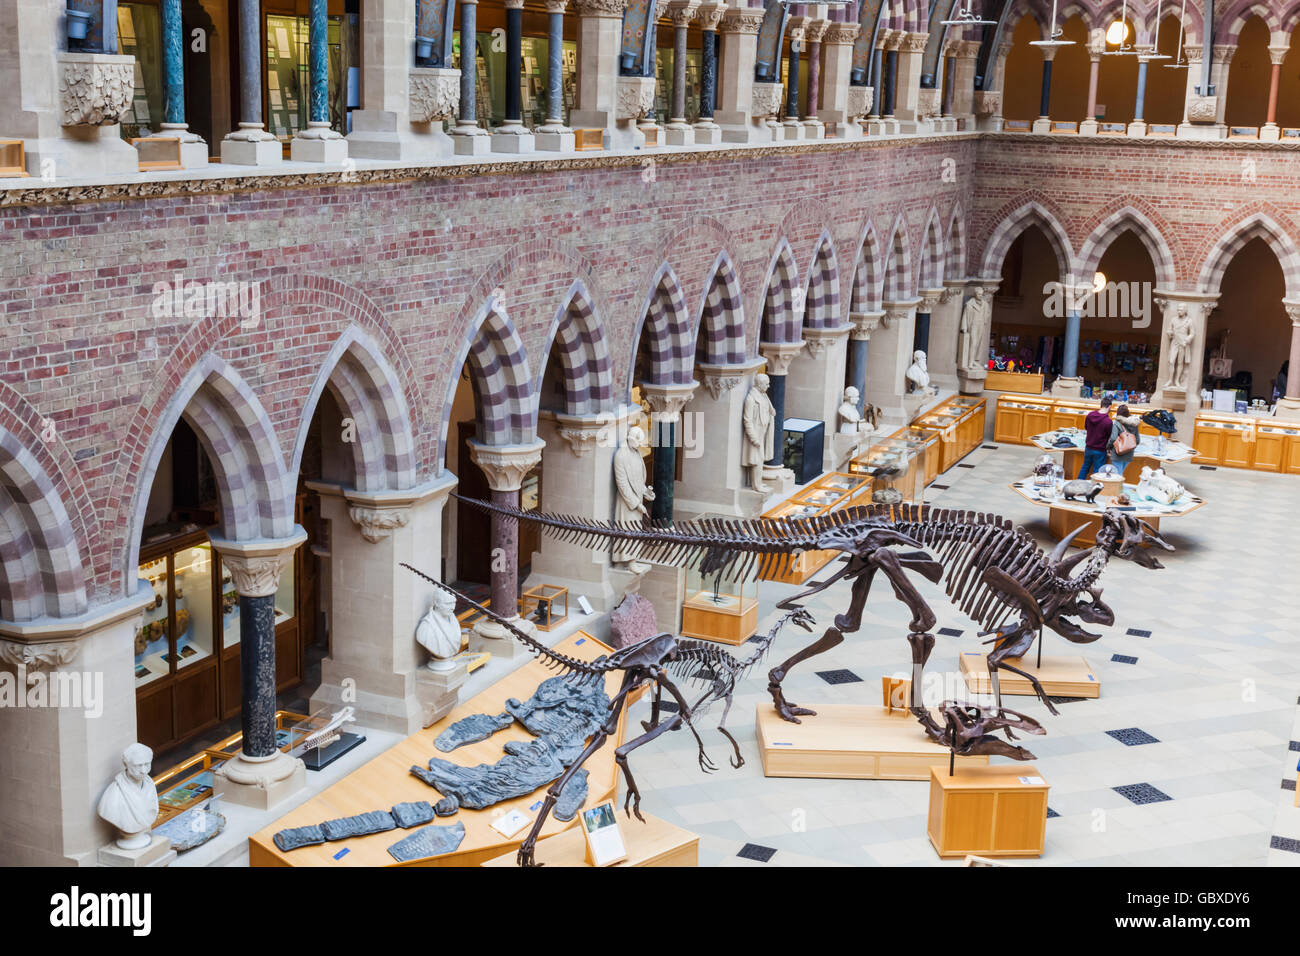 England, Oxfordshire, Oxford, Museum of Natural History, Innenansicht Stockfoto